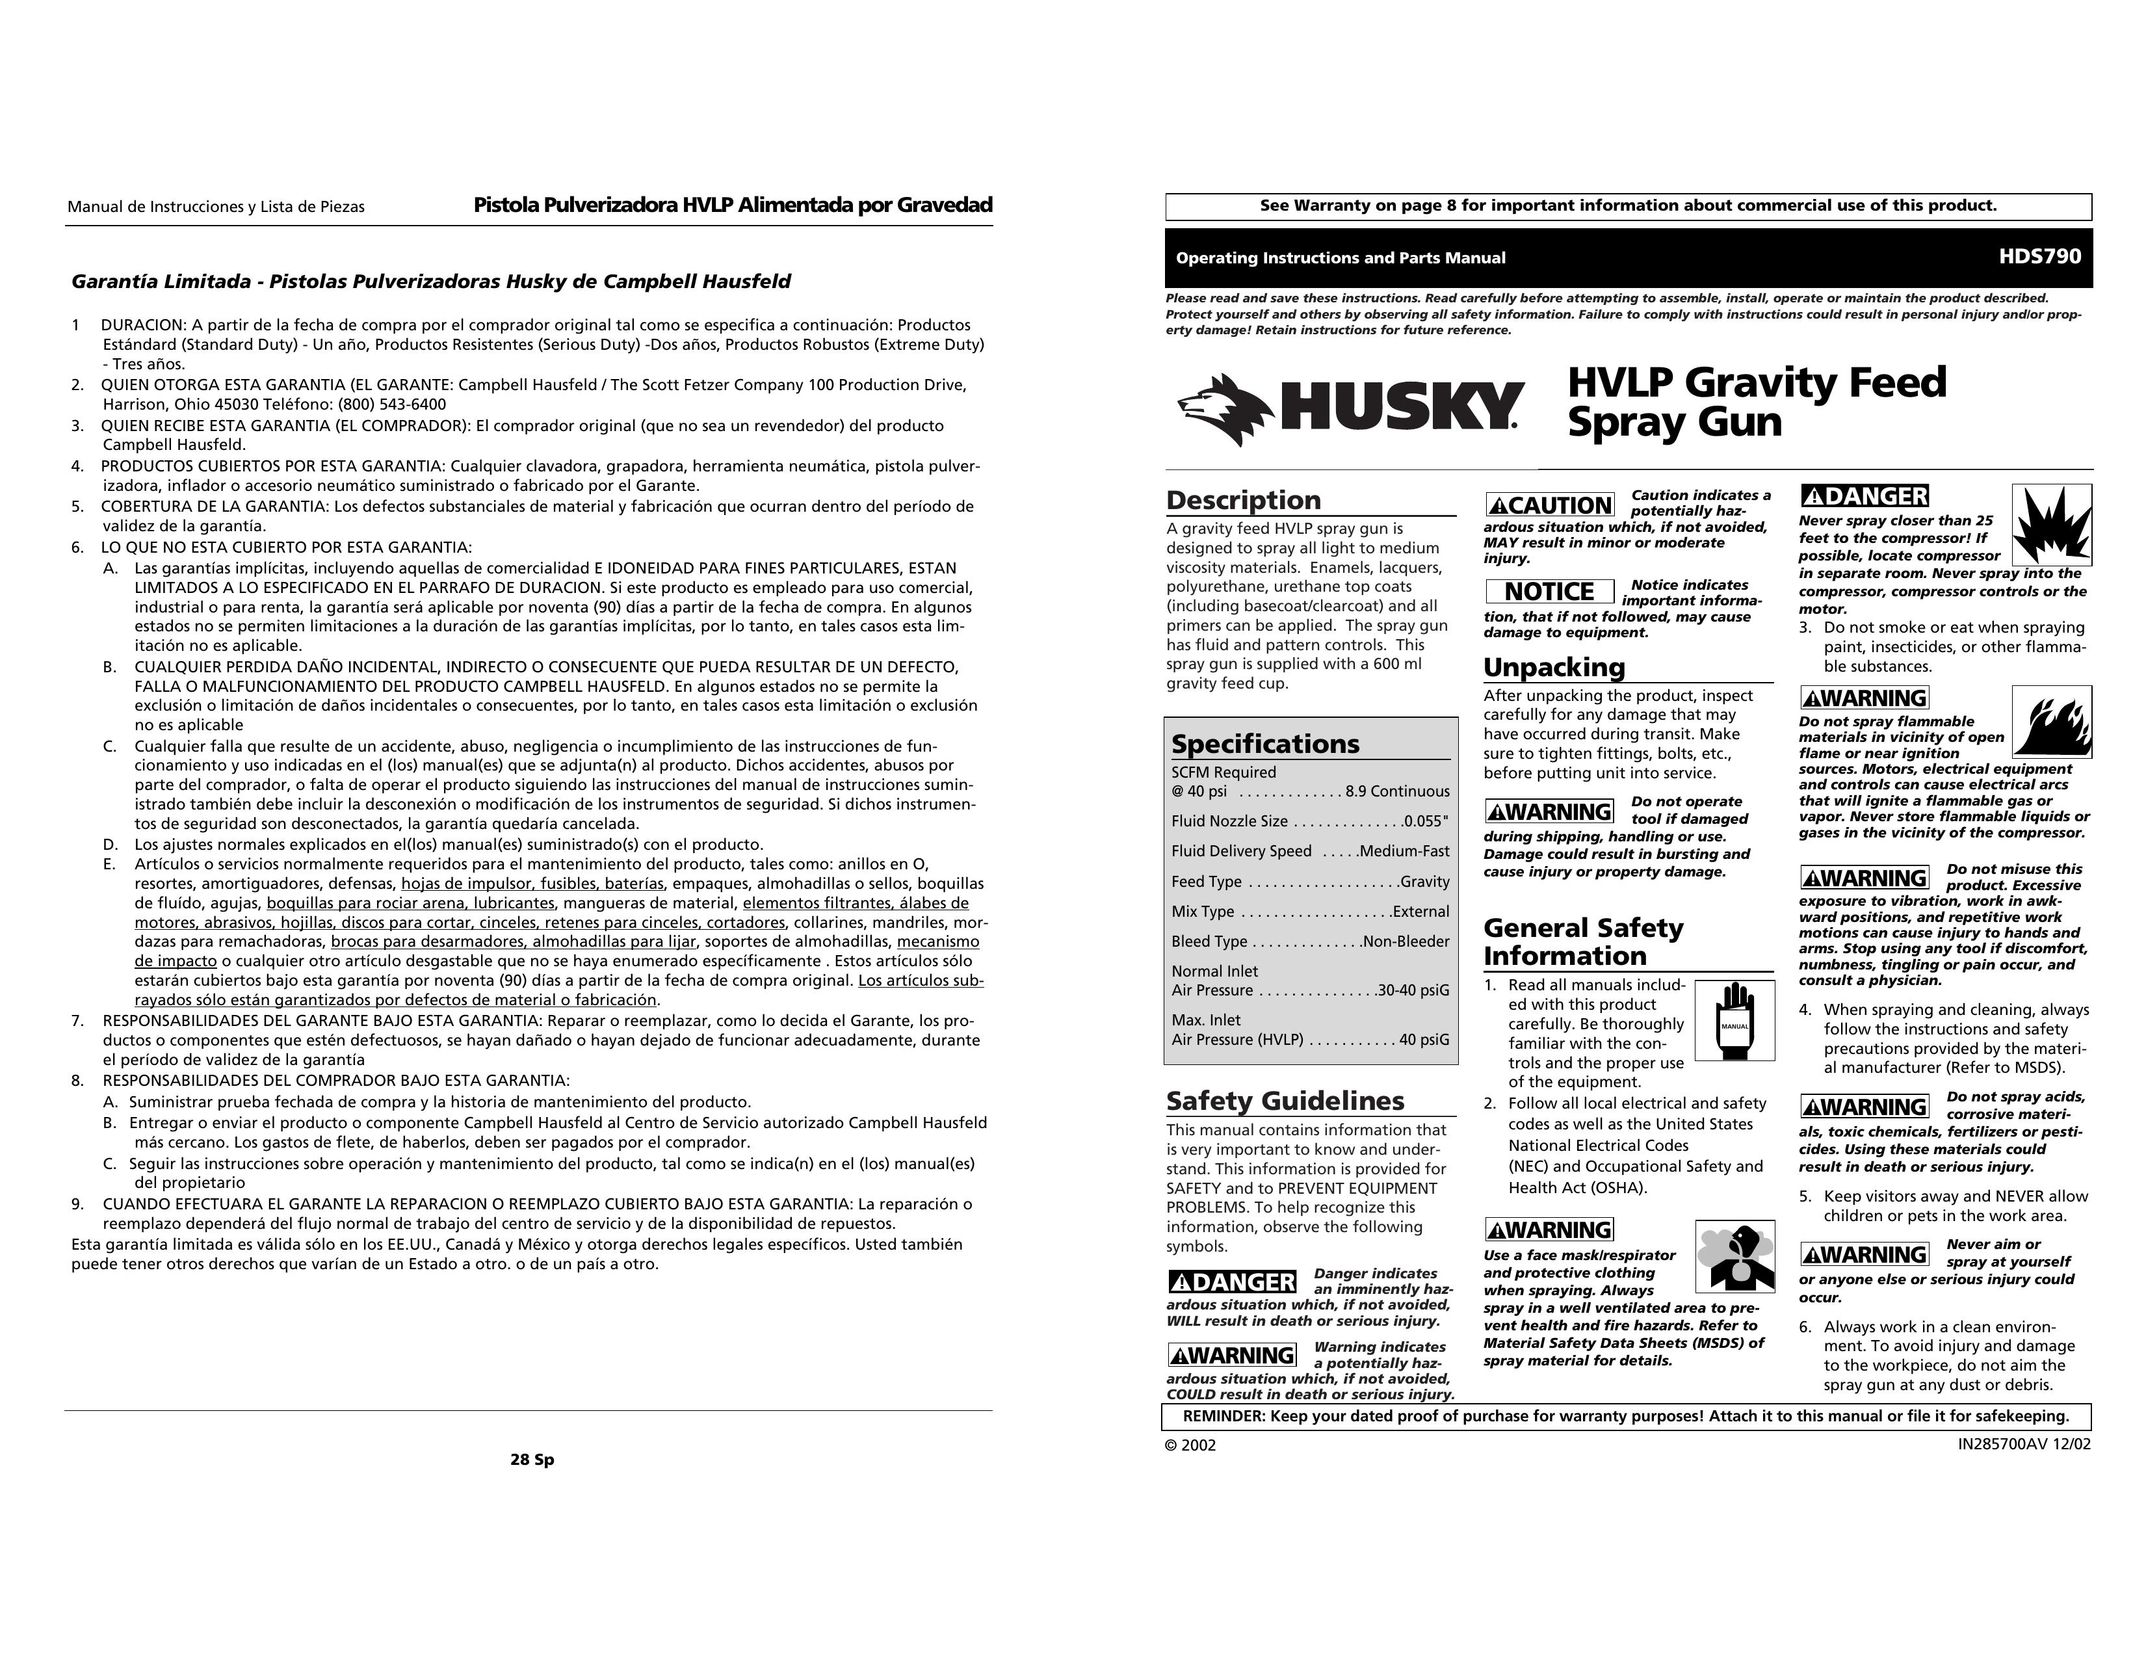 Husky HDS790 Network Cables User Manual